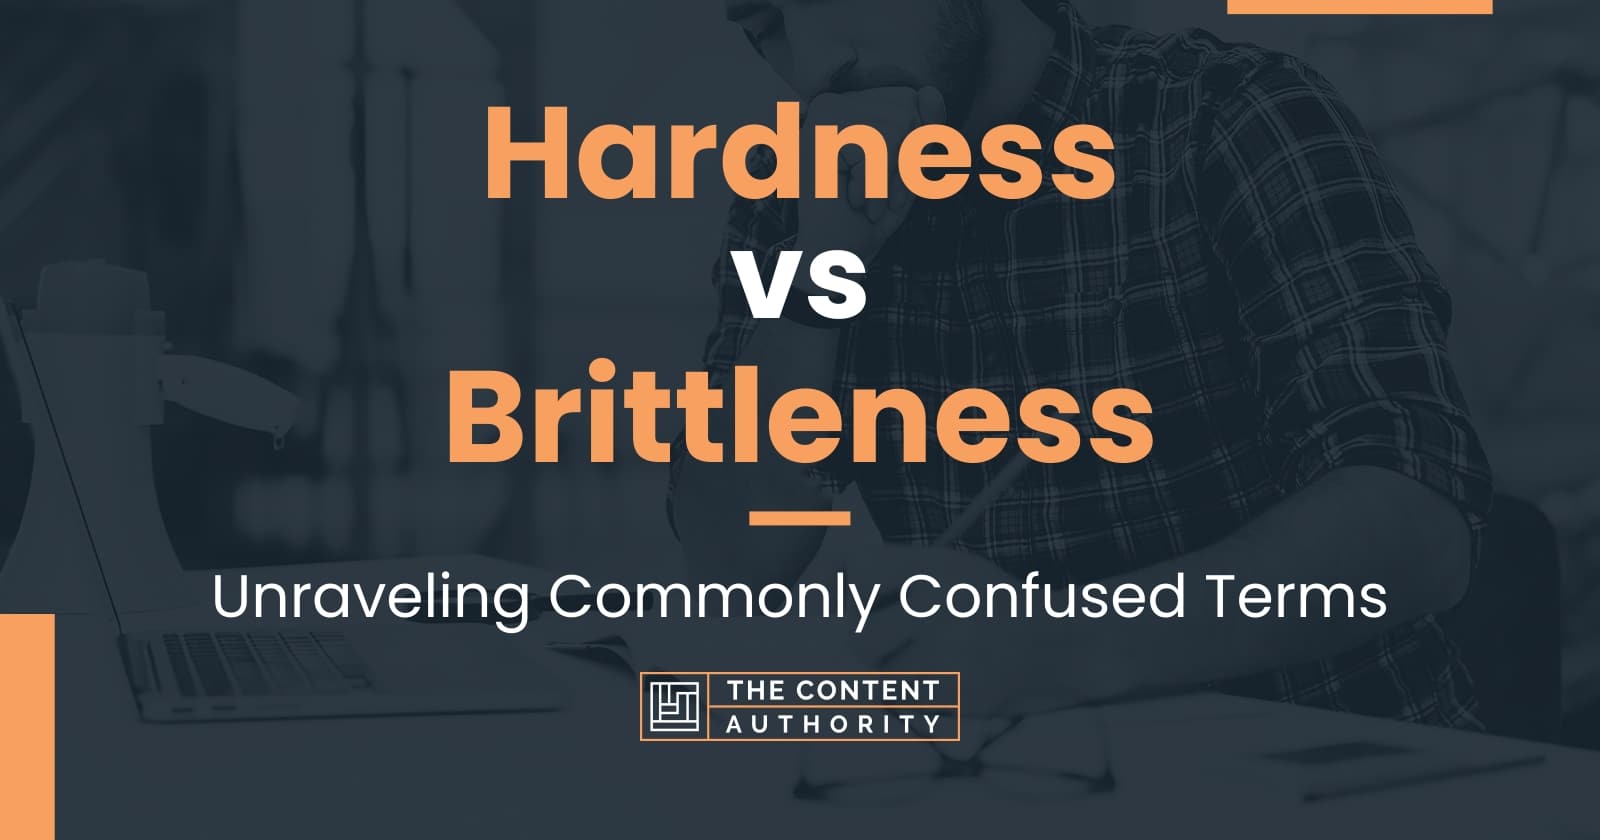 Hardness vs Brittleness: Unraveling Commonly Confused Terms